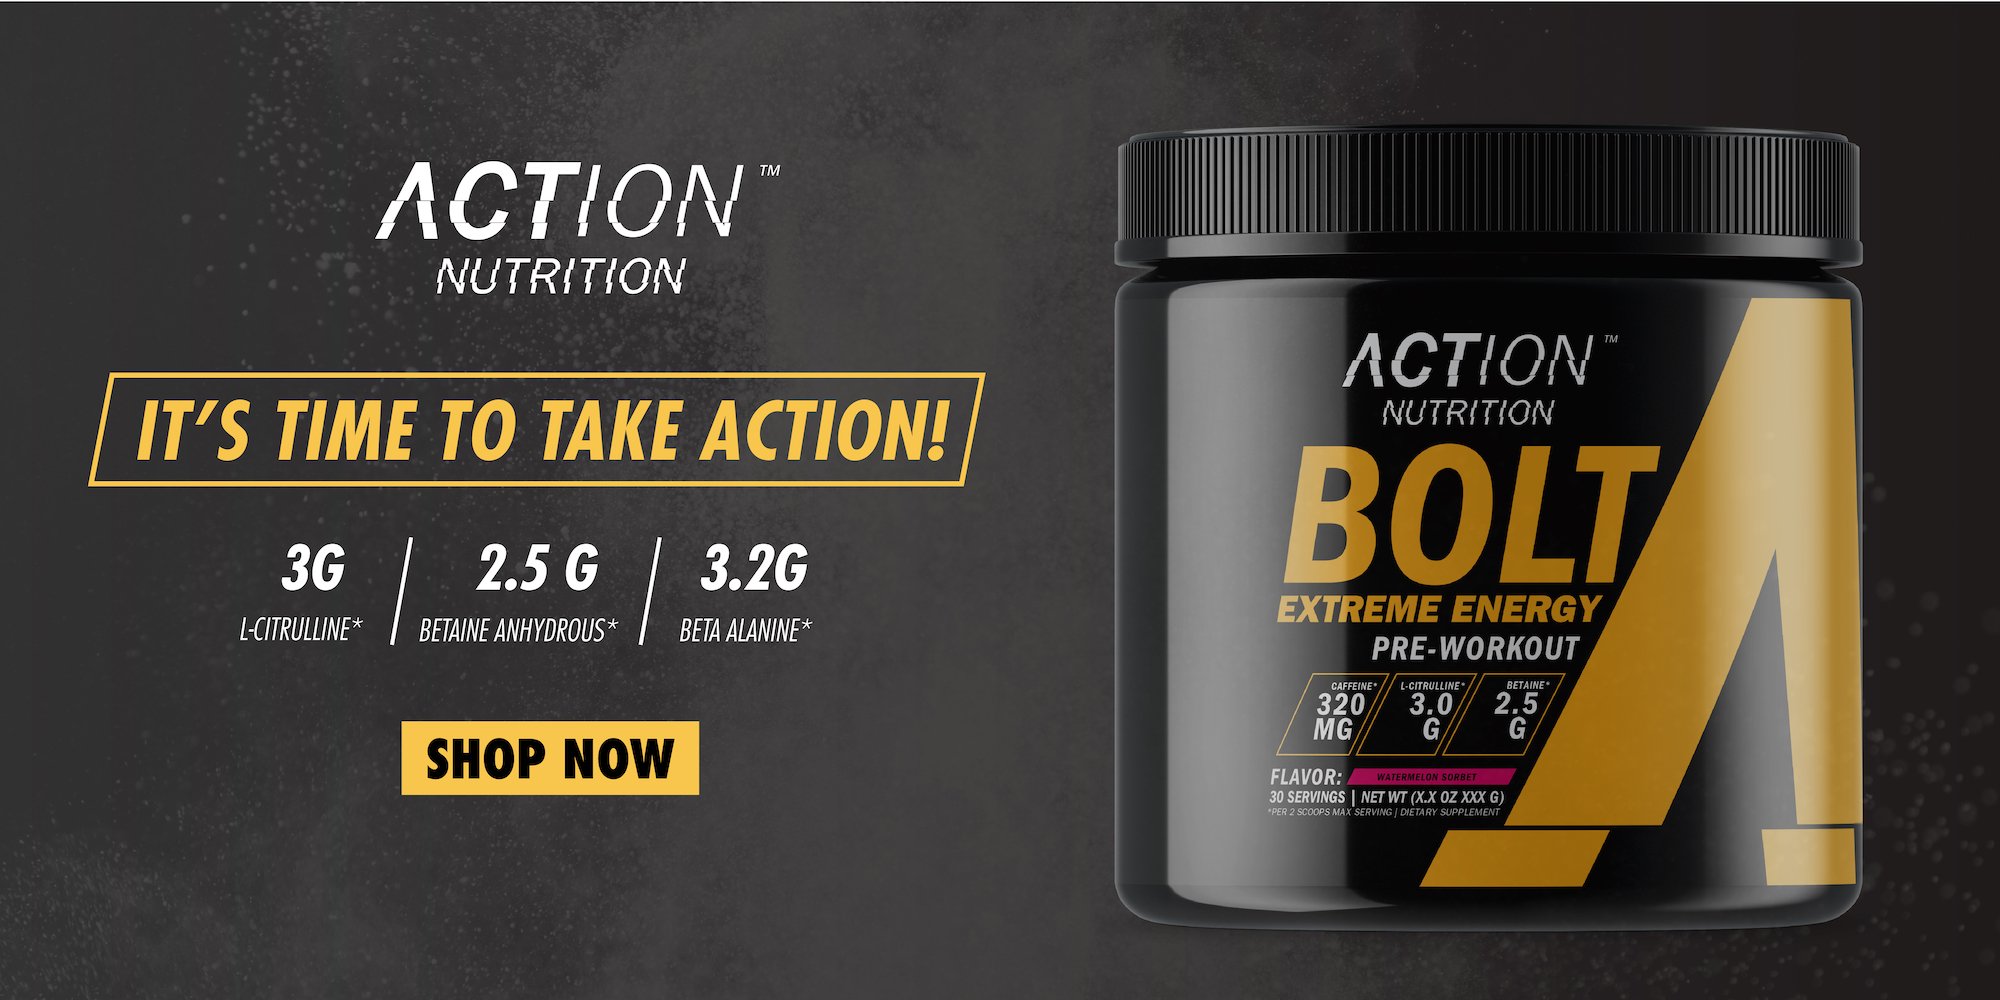 Action Nutrition Bolt Extreme Energy